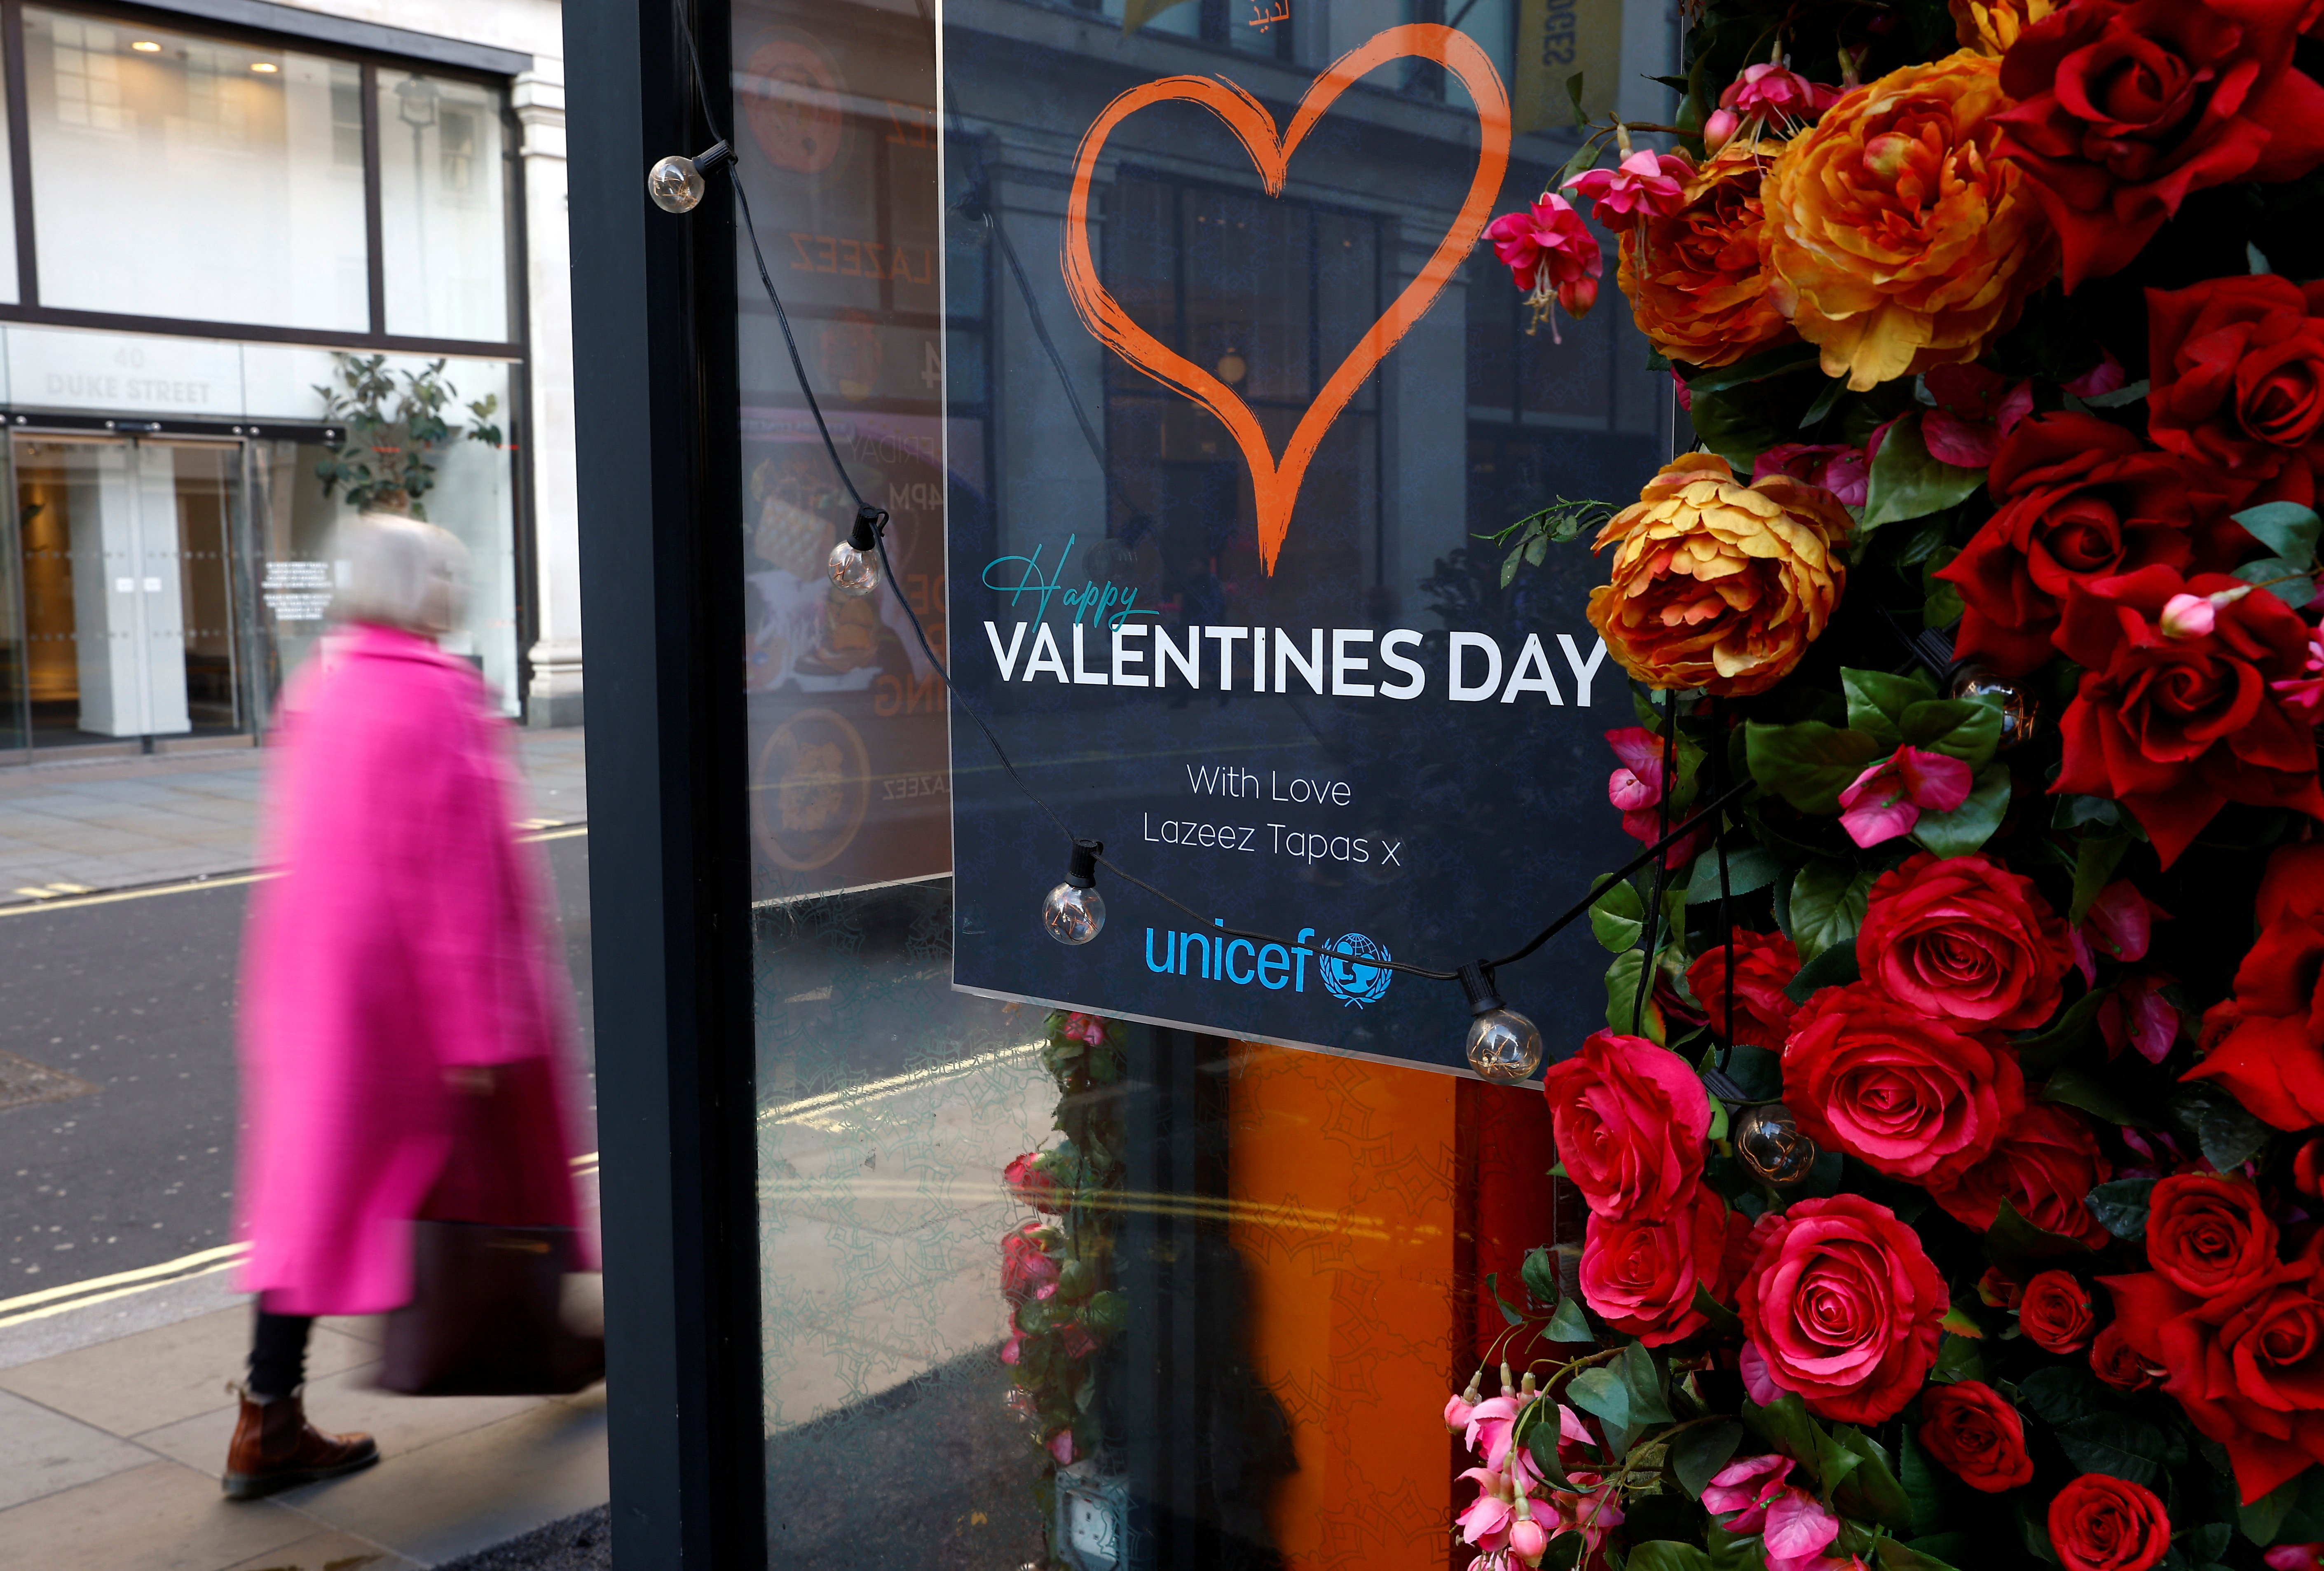 A woman walks past a Valentines Day sign in a restaurant in London